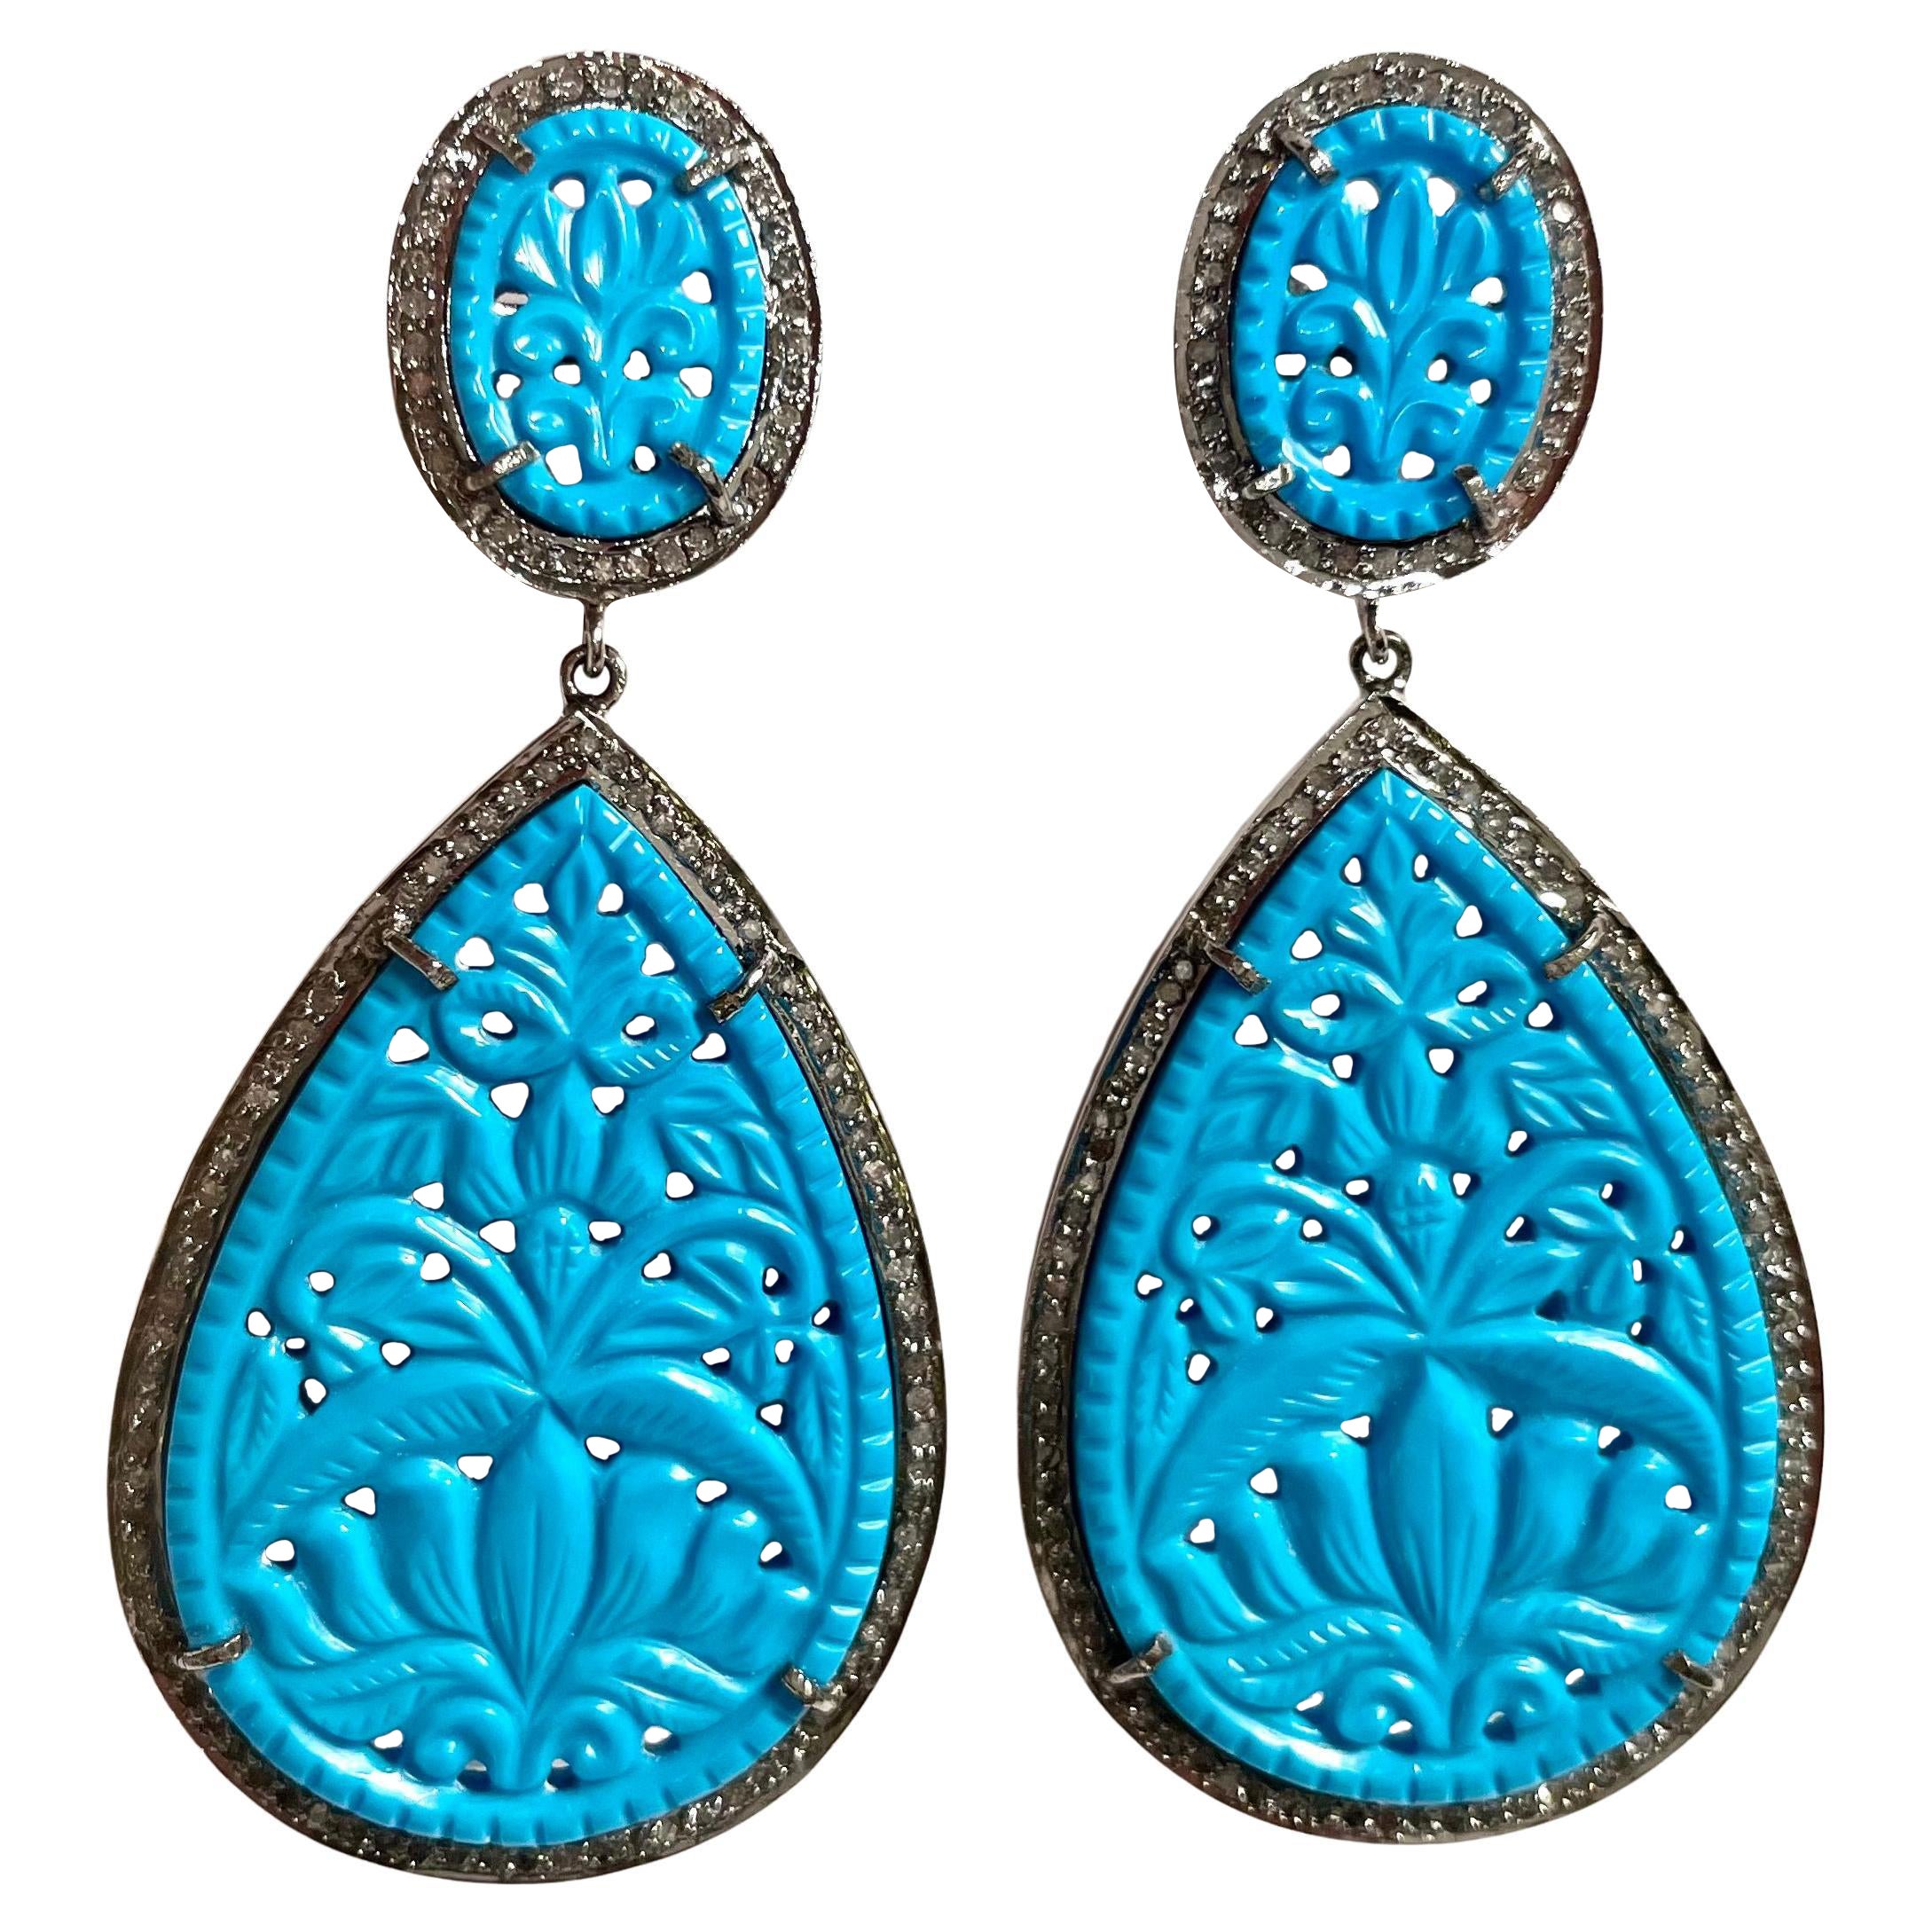 Turquoise Hand-Carved Earrings with Pave Diamonds